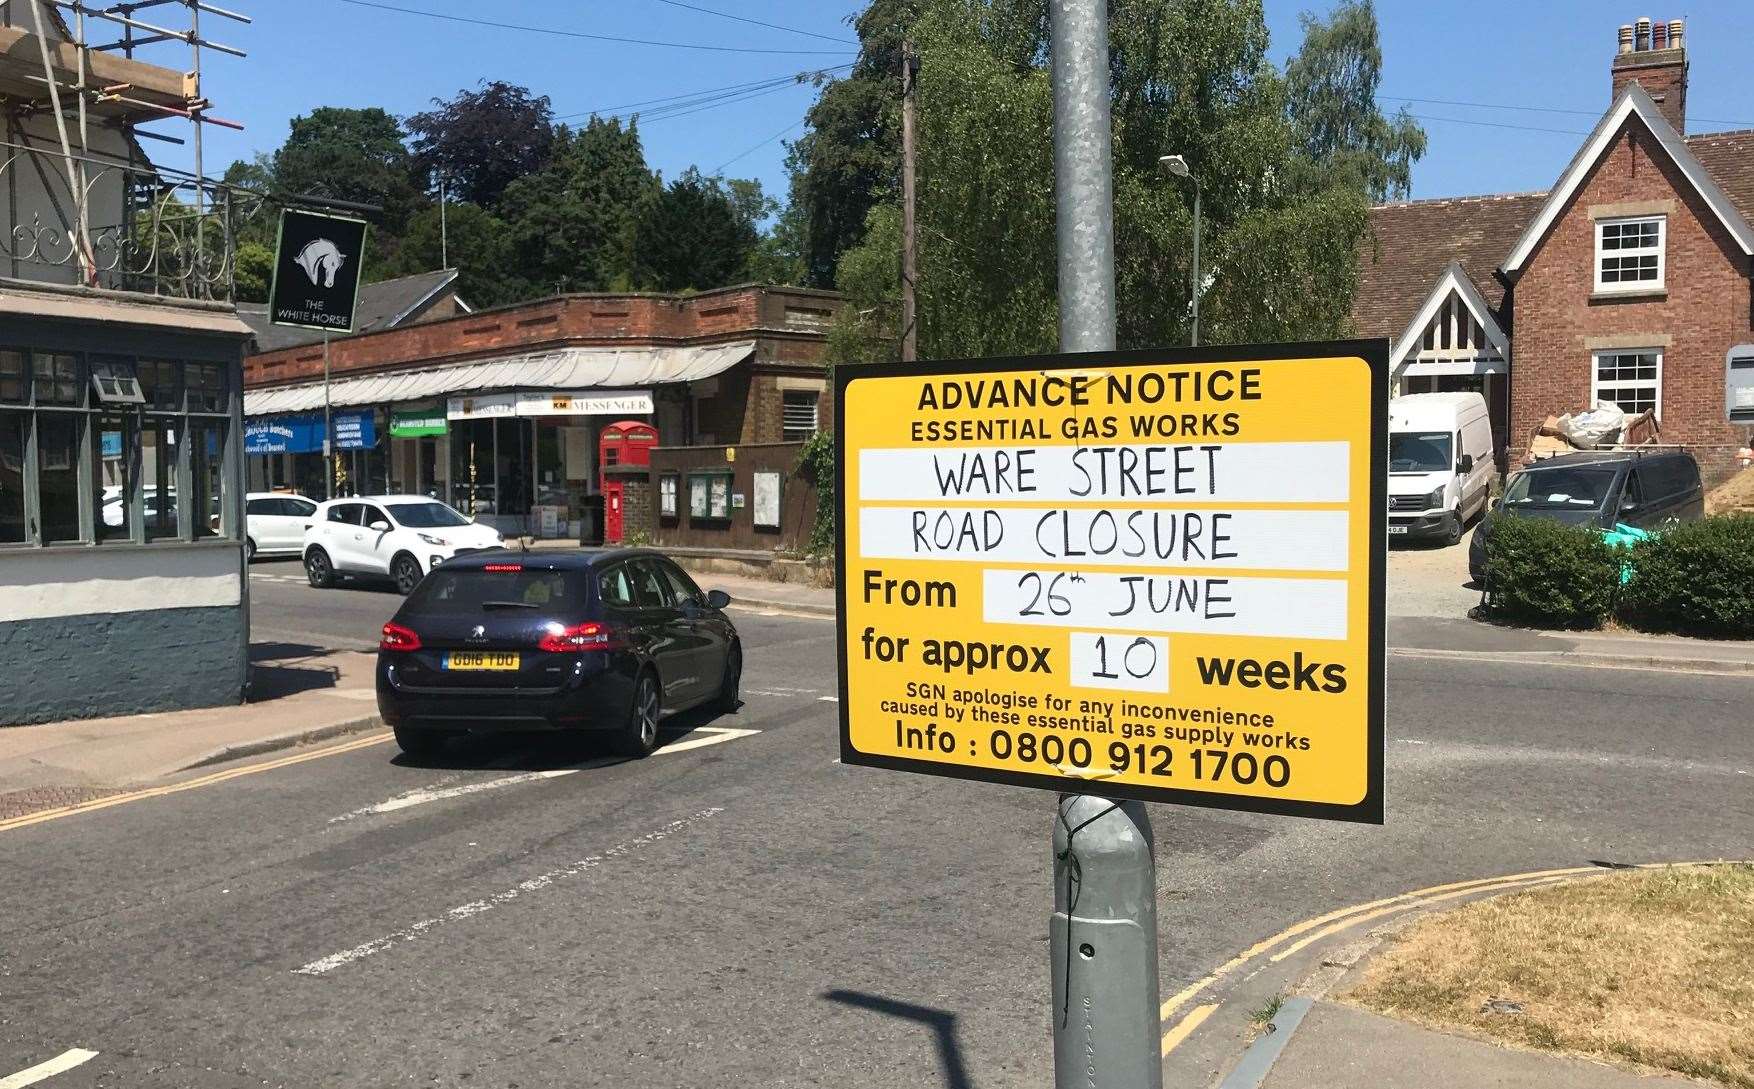 A sign warning drivers that Ware Street in Bearsted will be shut for about 10 weeks from June 26